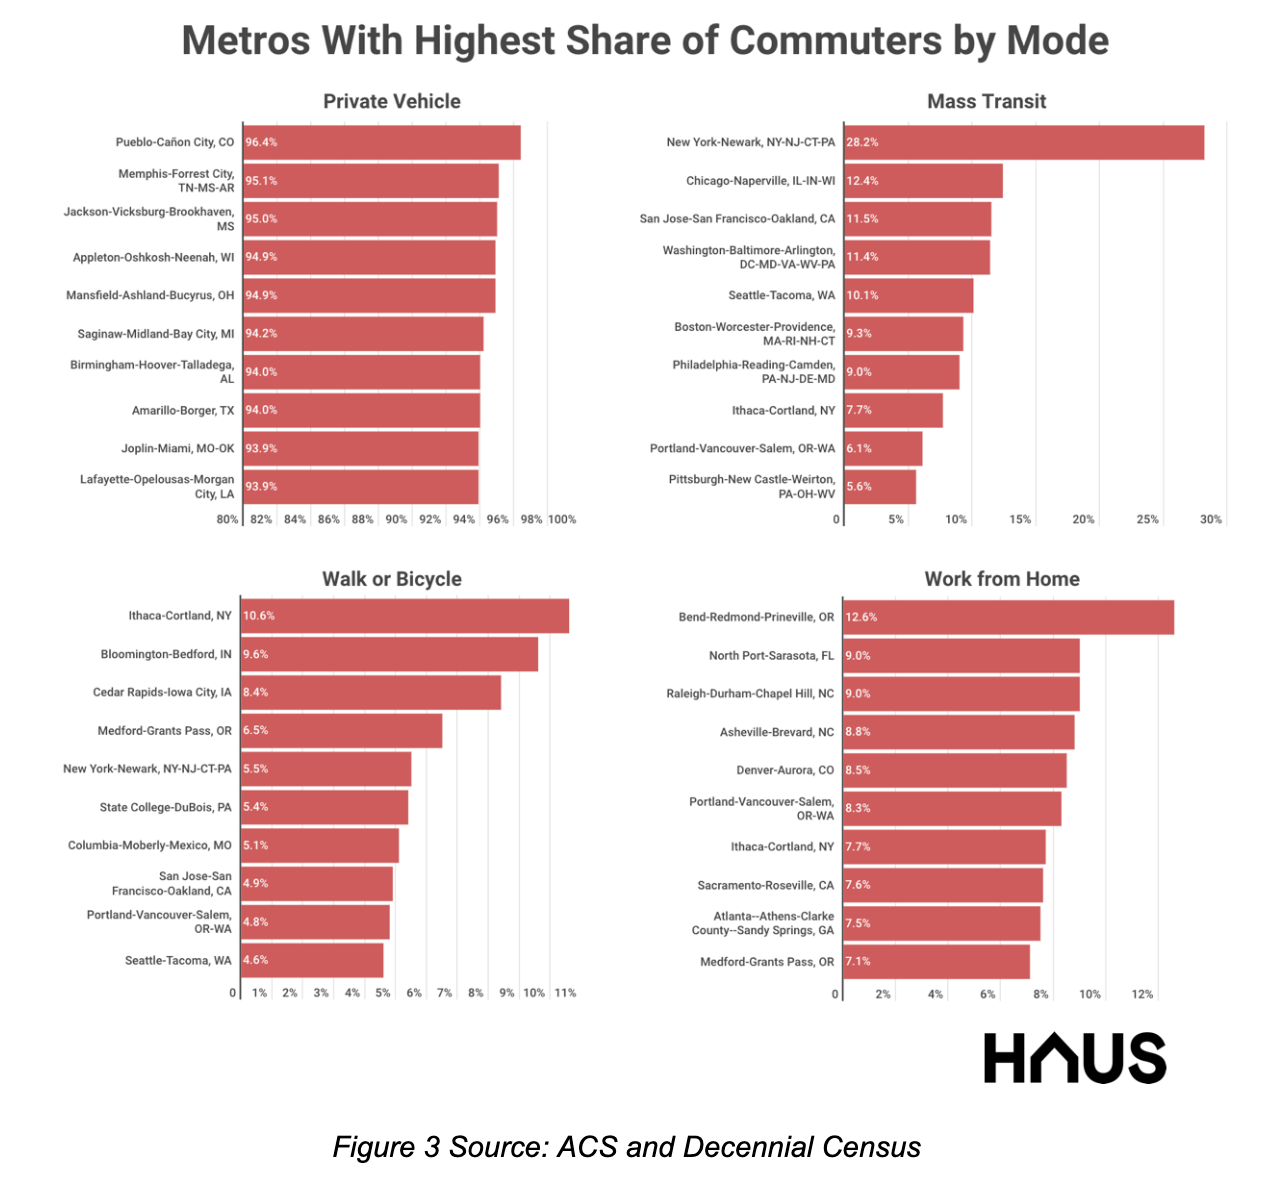 Metros with highest share of commuters